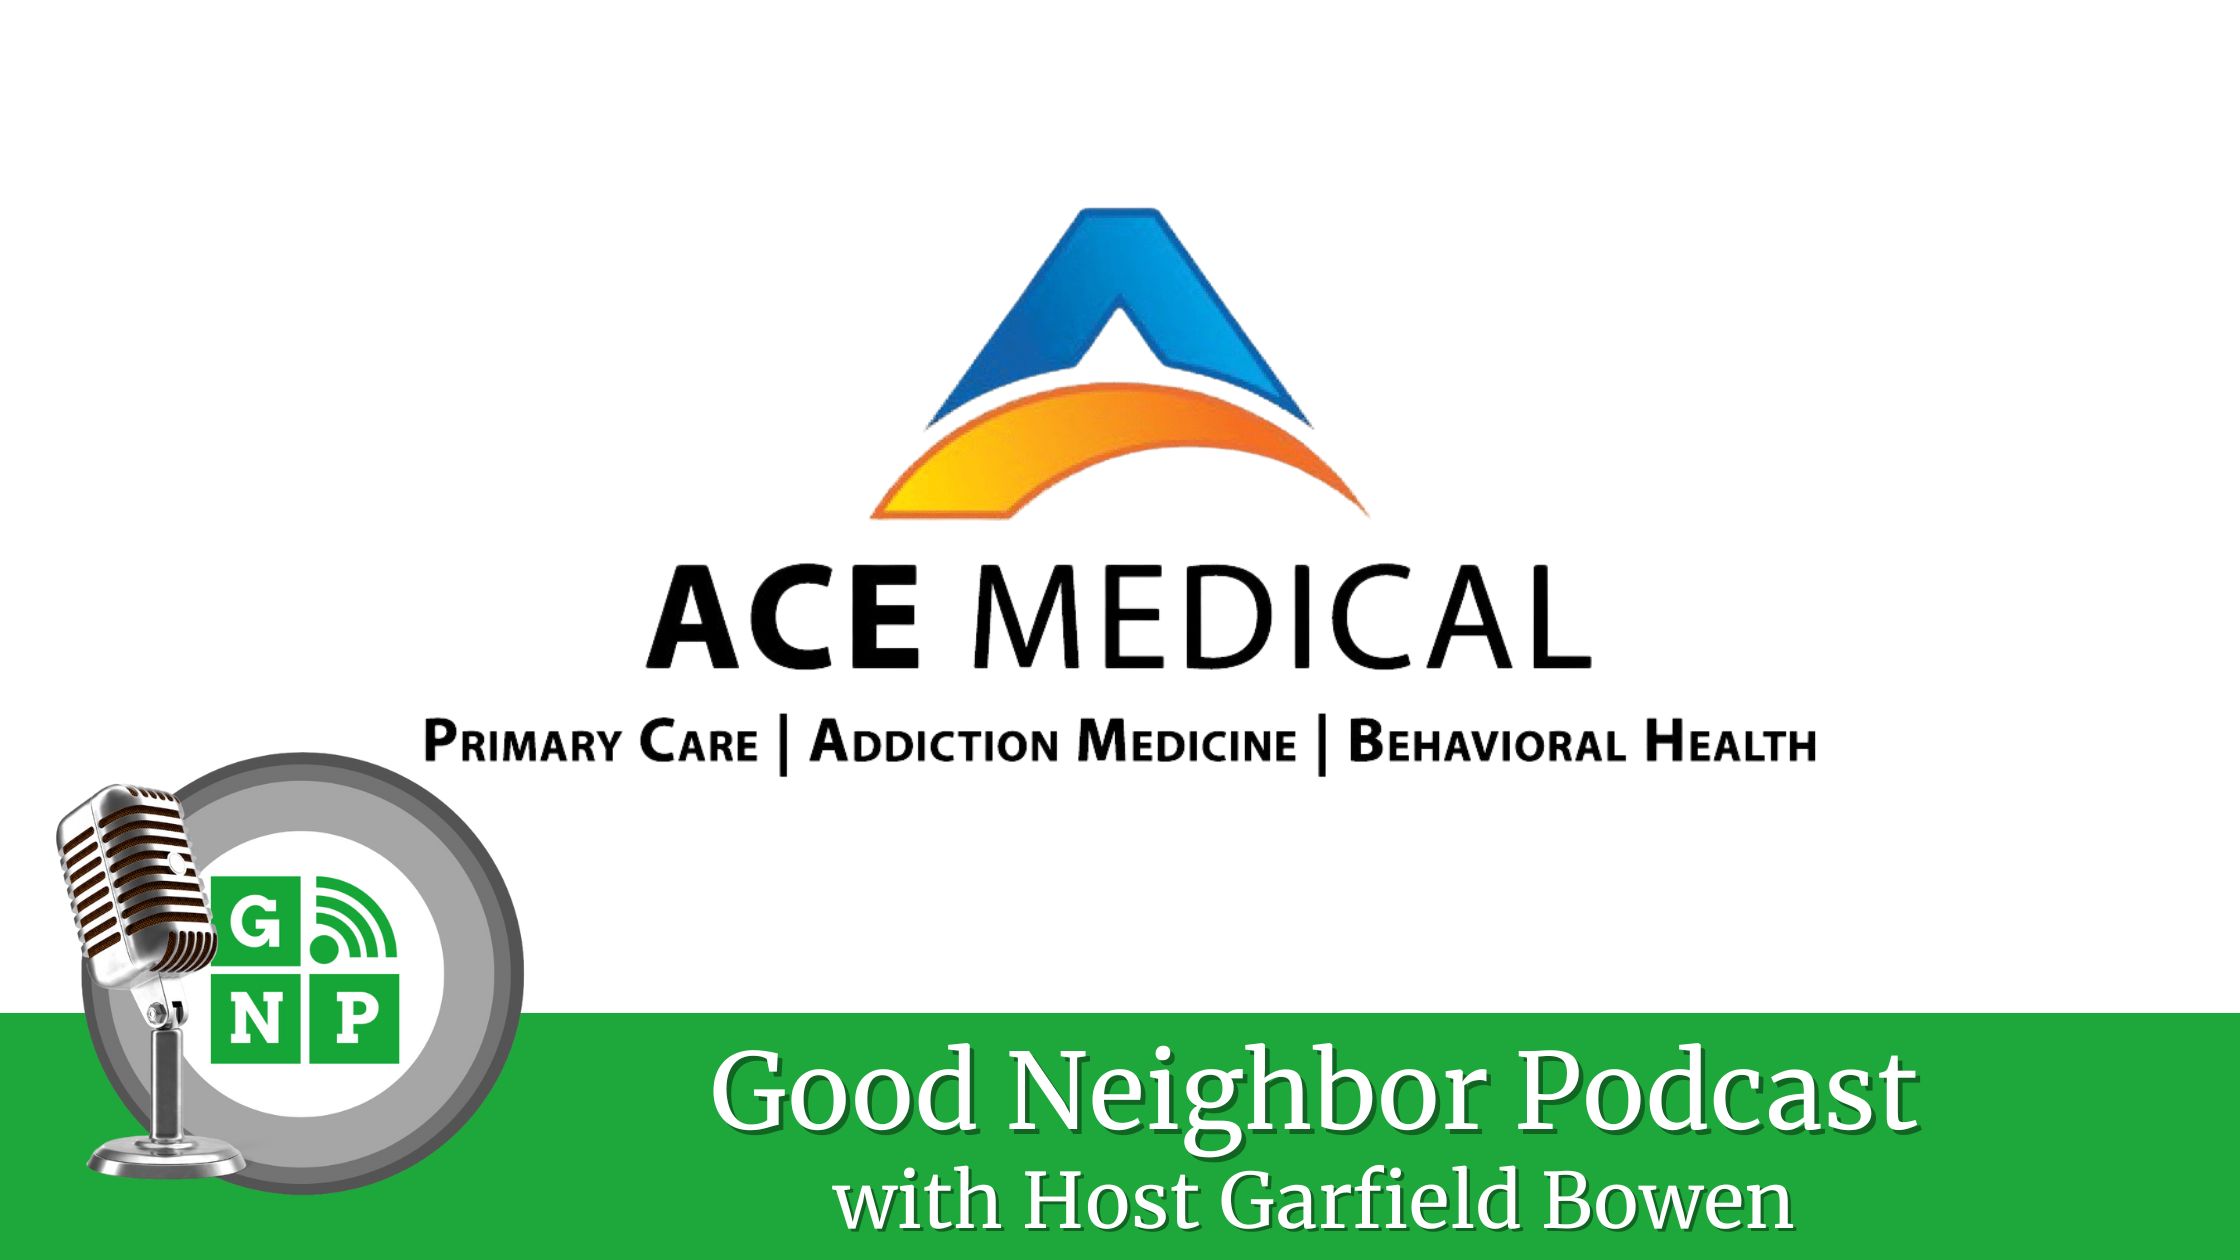 EP #1: Ace Medical with Mr. Sharma